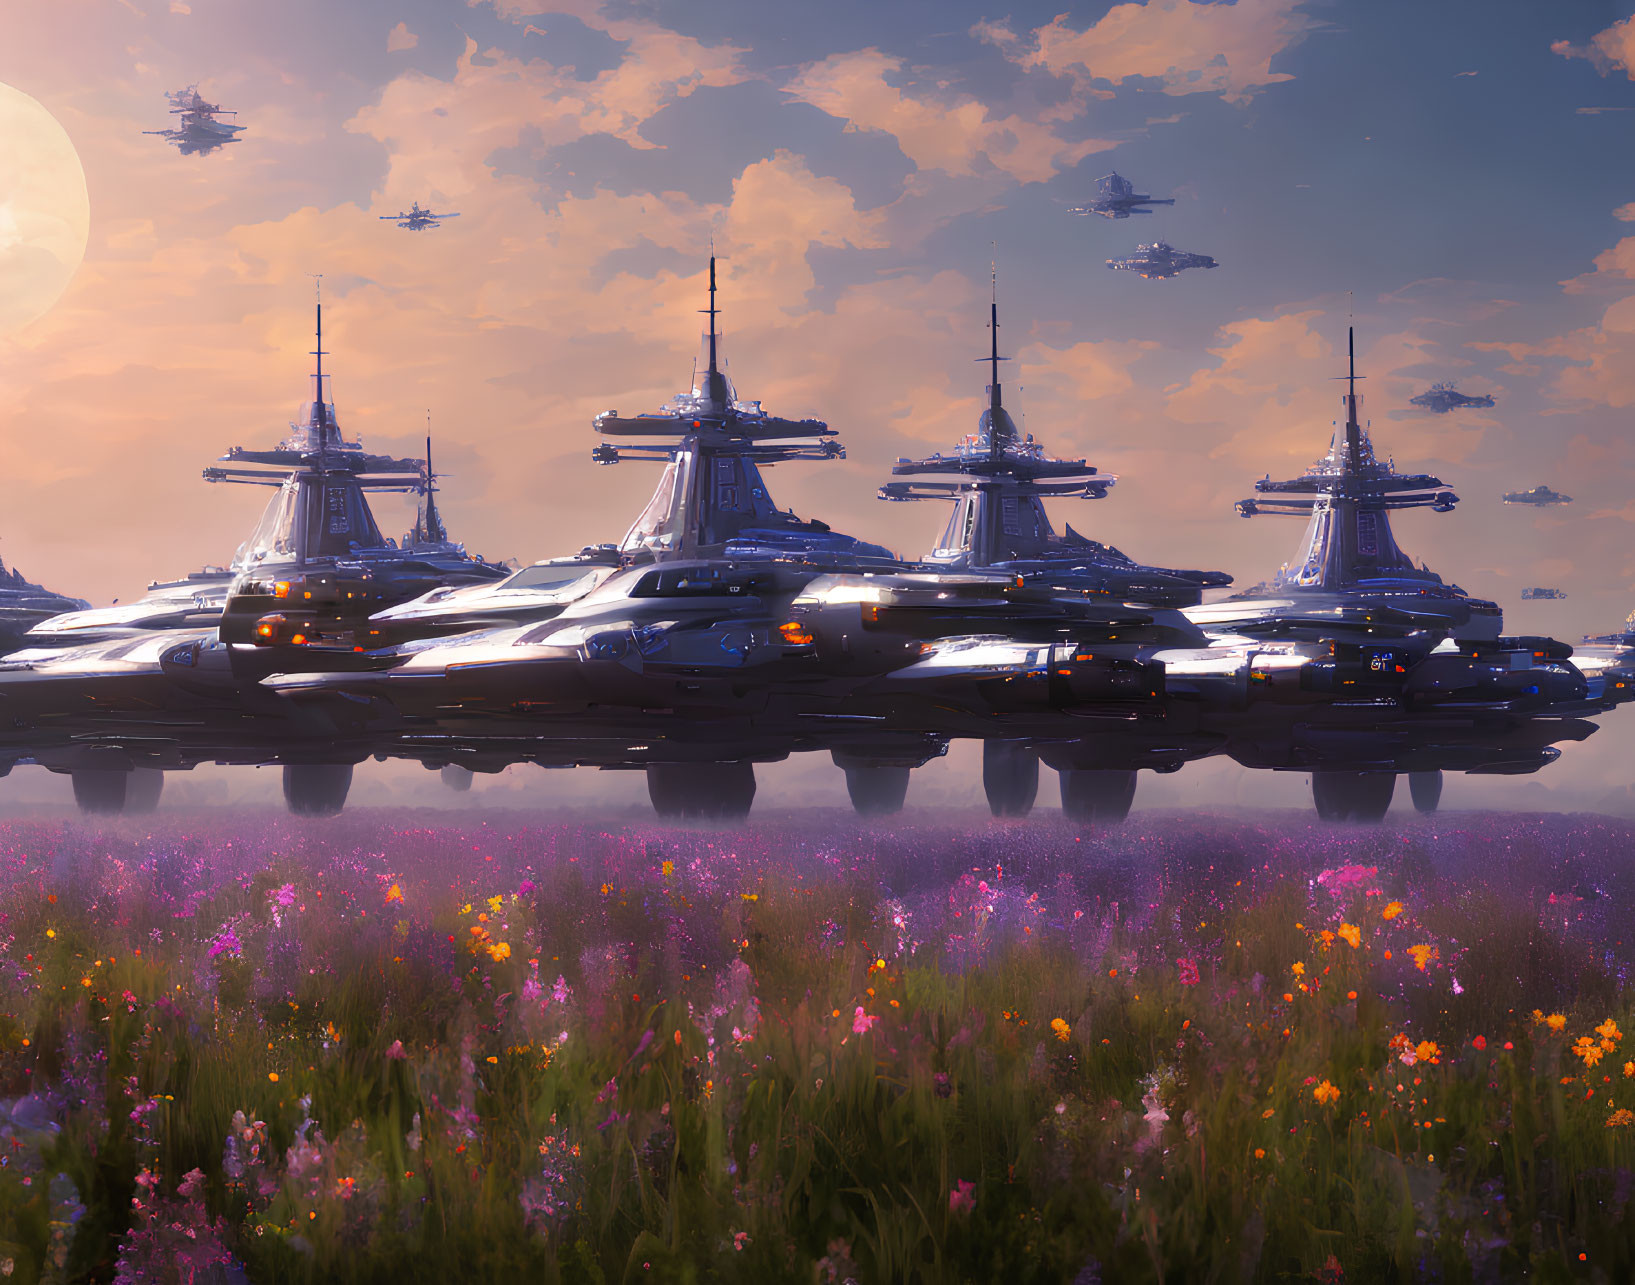 Futuristic spaceships above flower-covered meadow at dusk